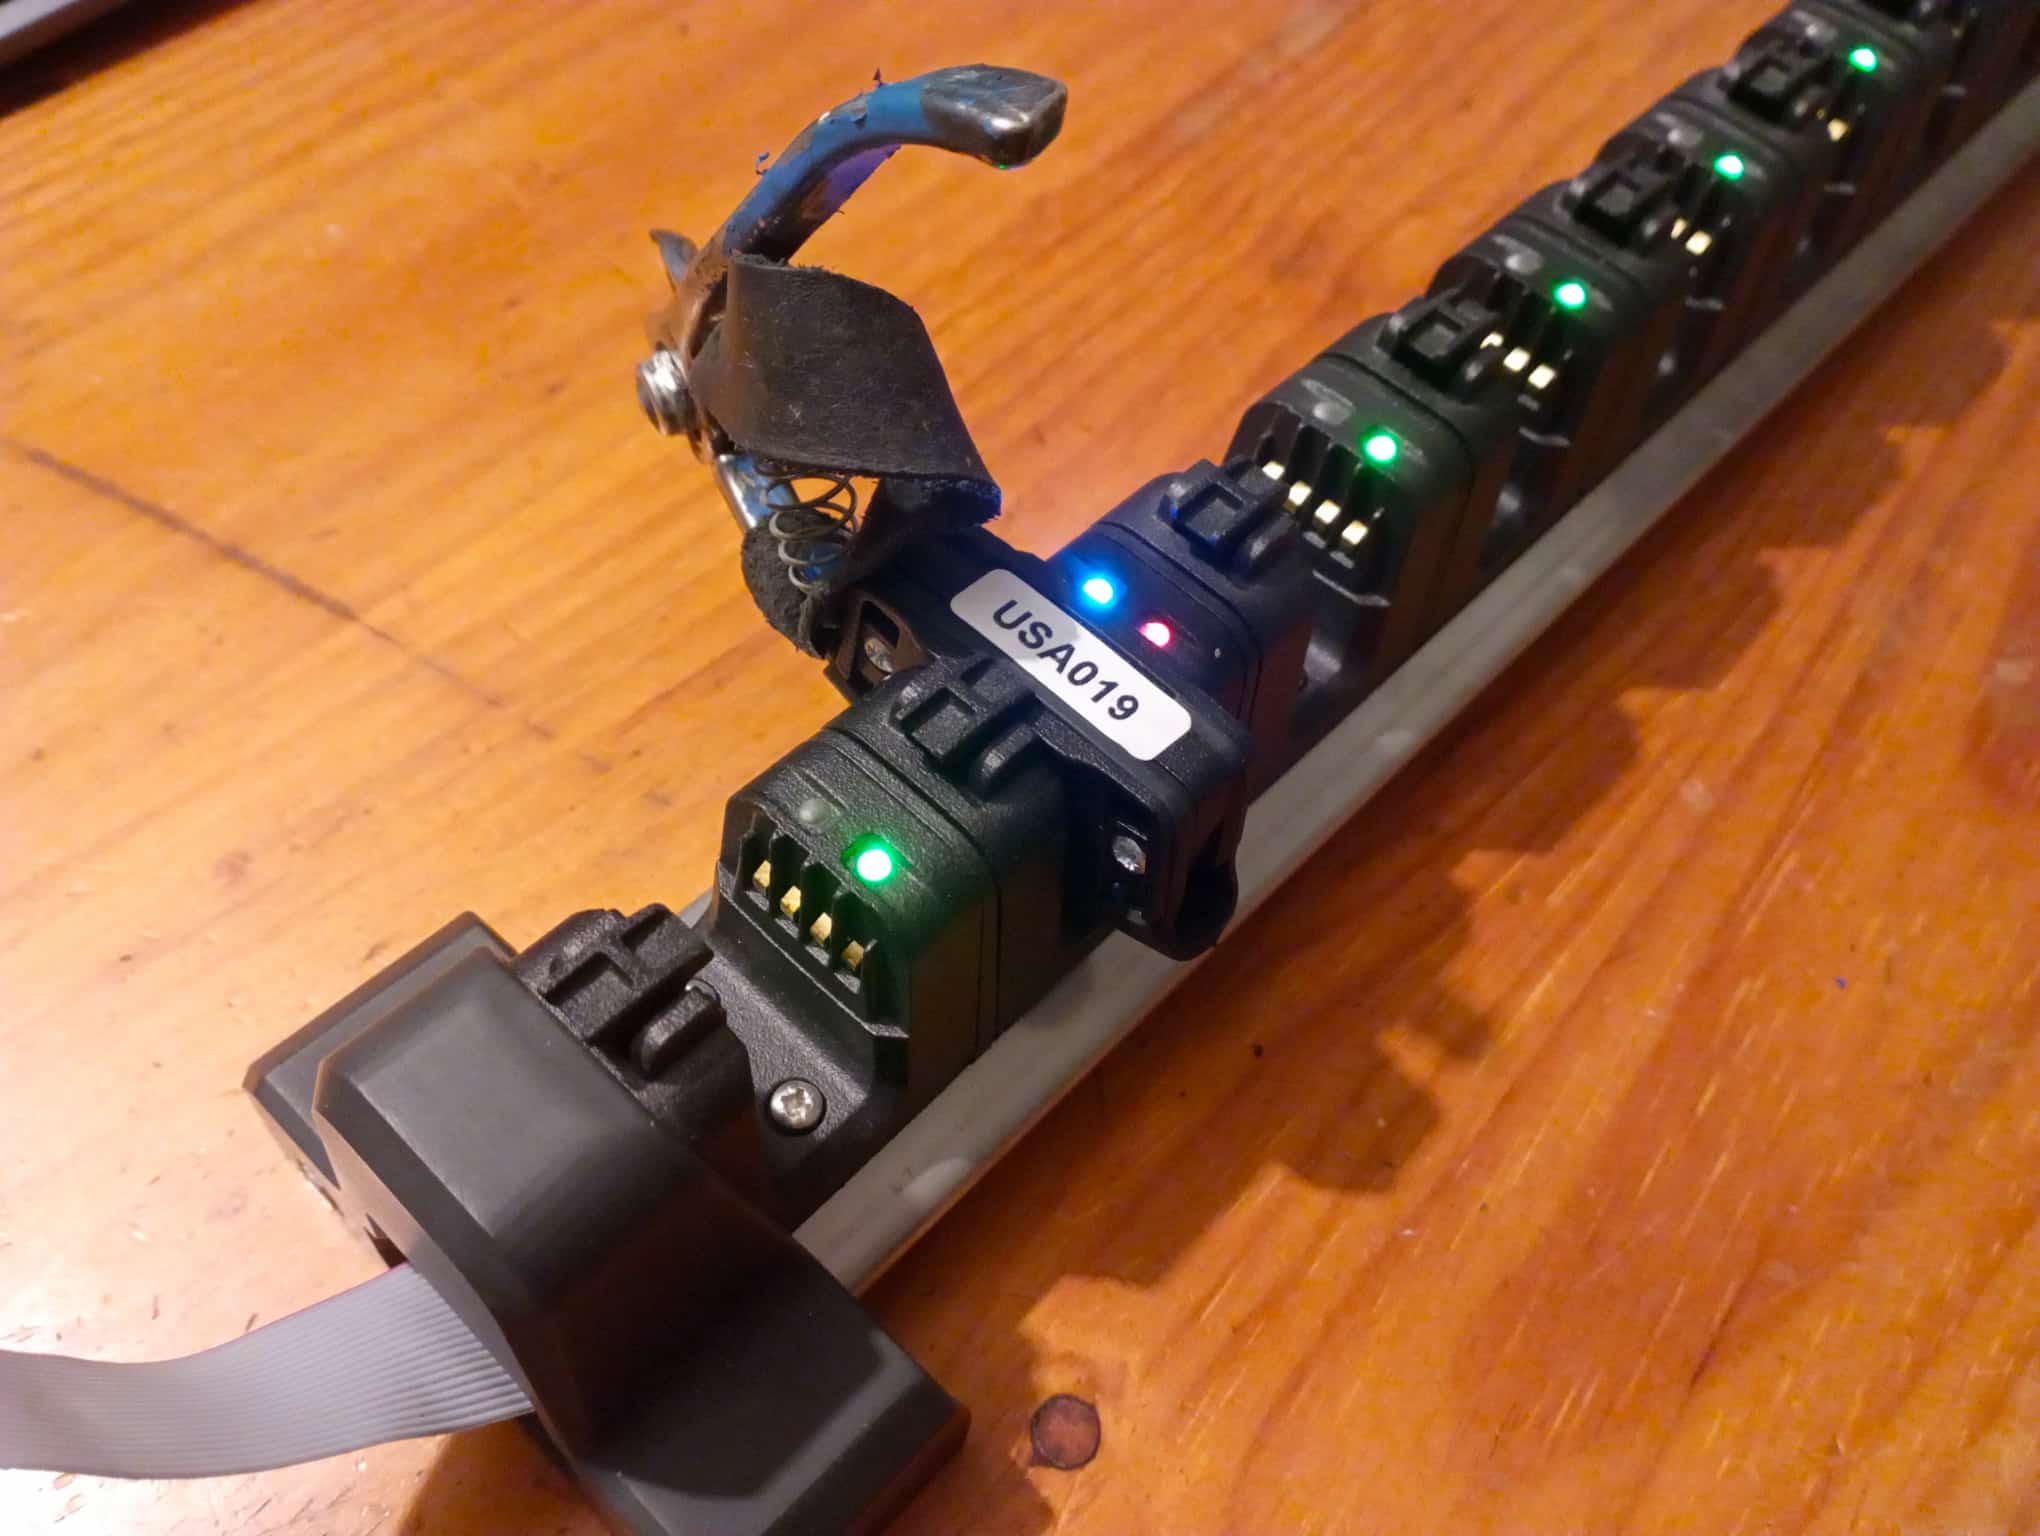 A Picklogger in a 12 position dock.